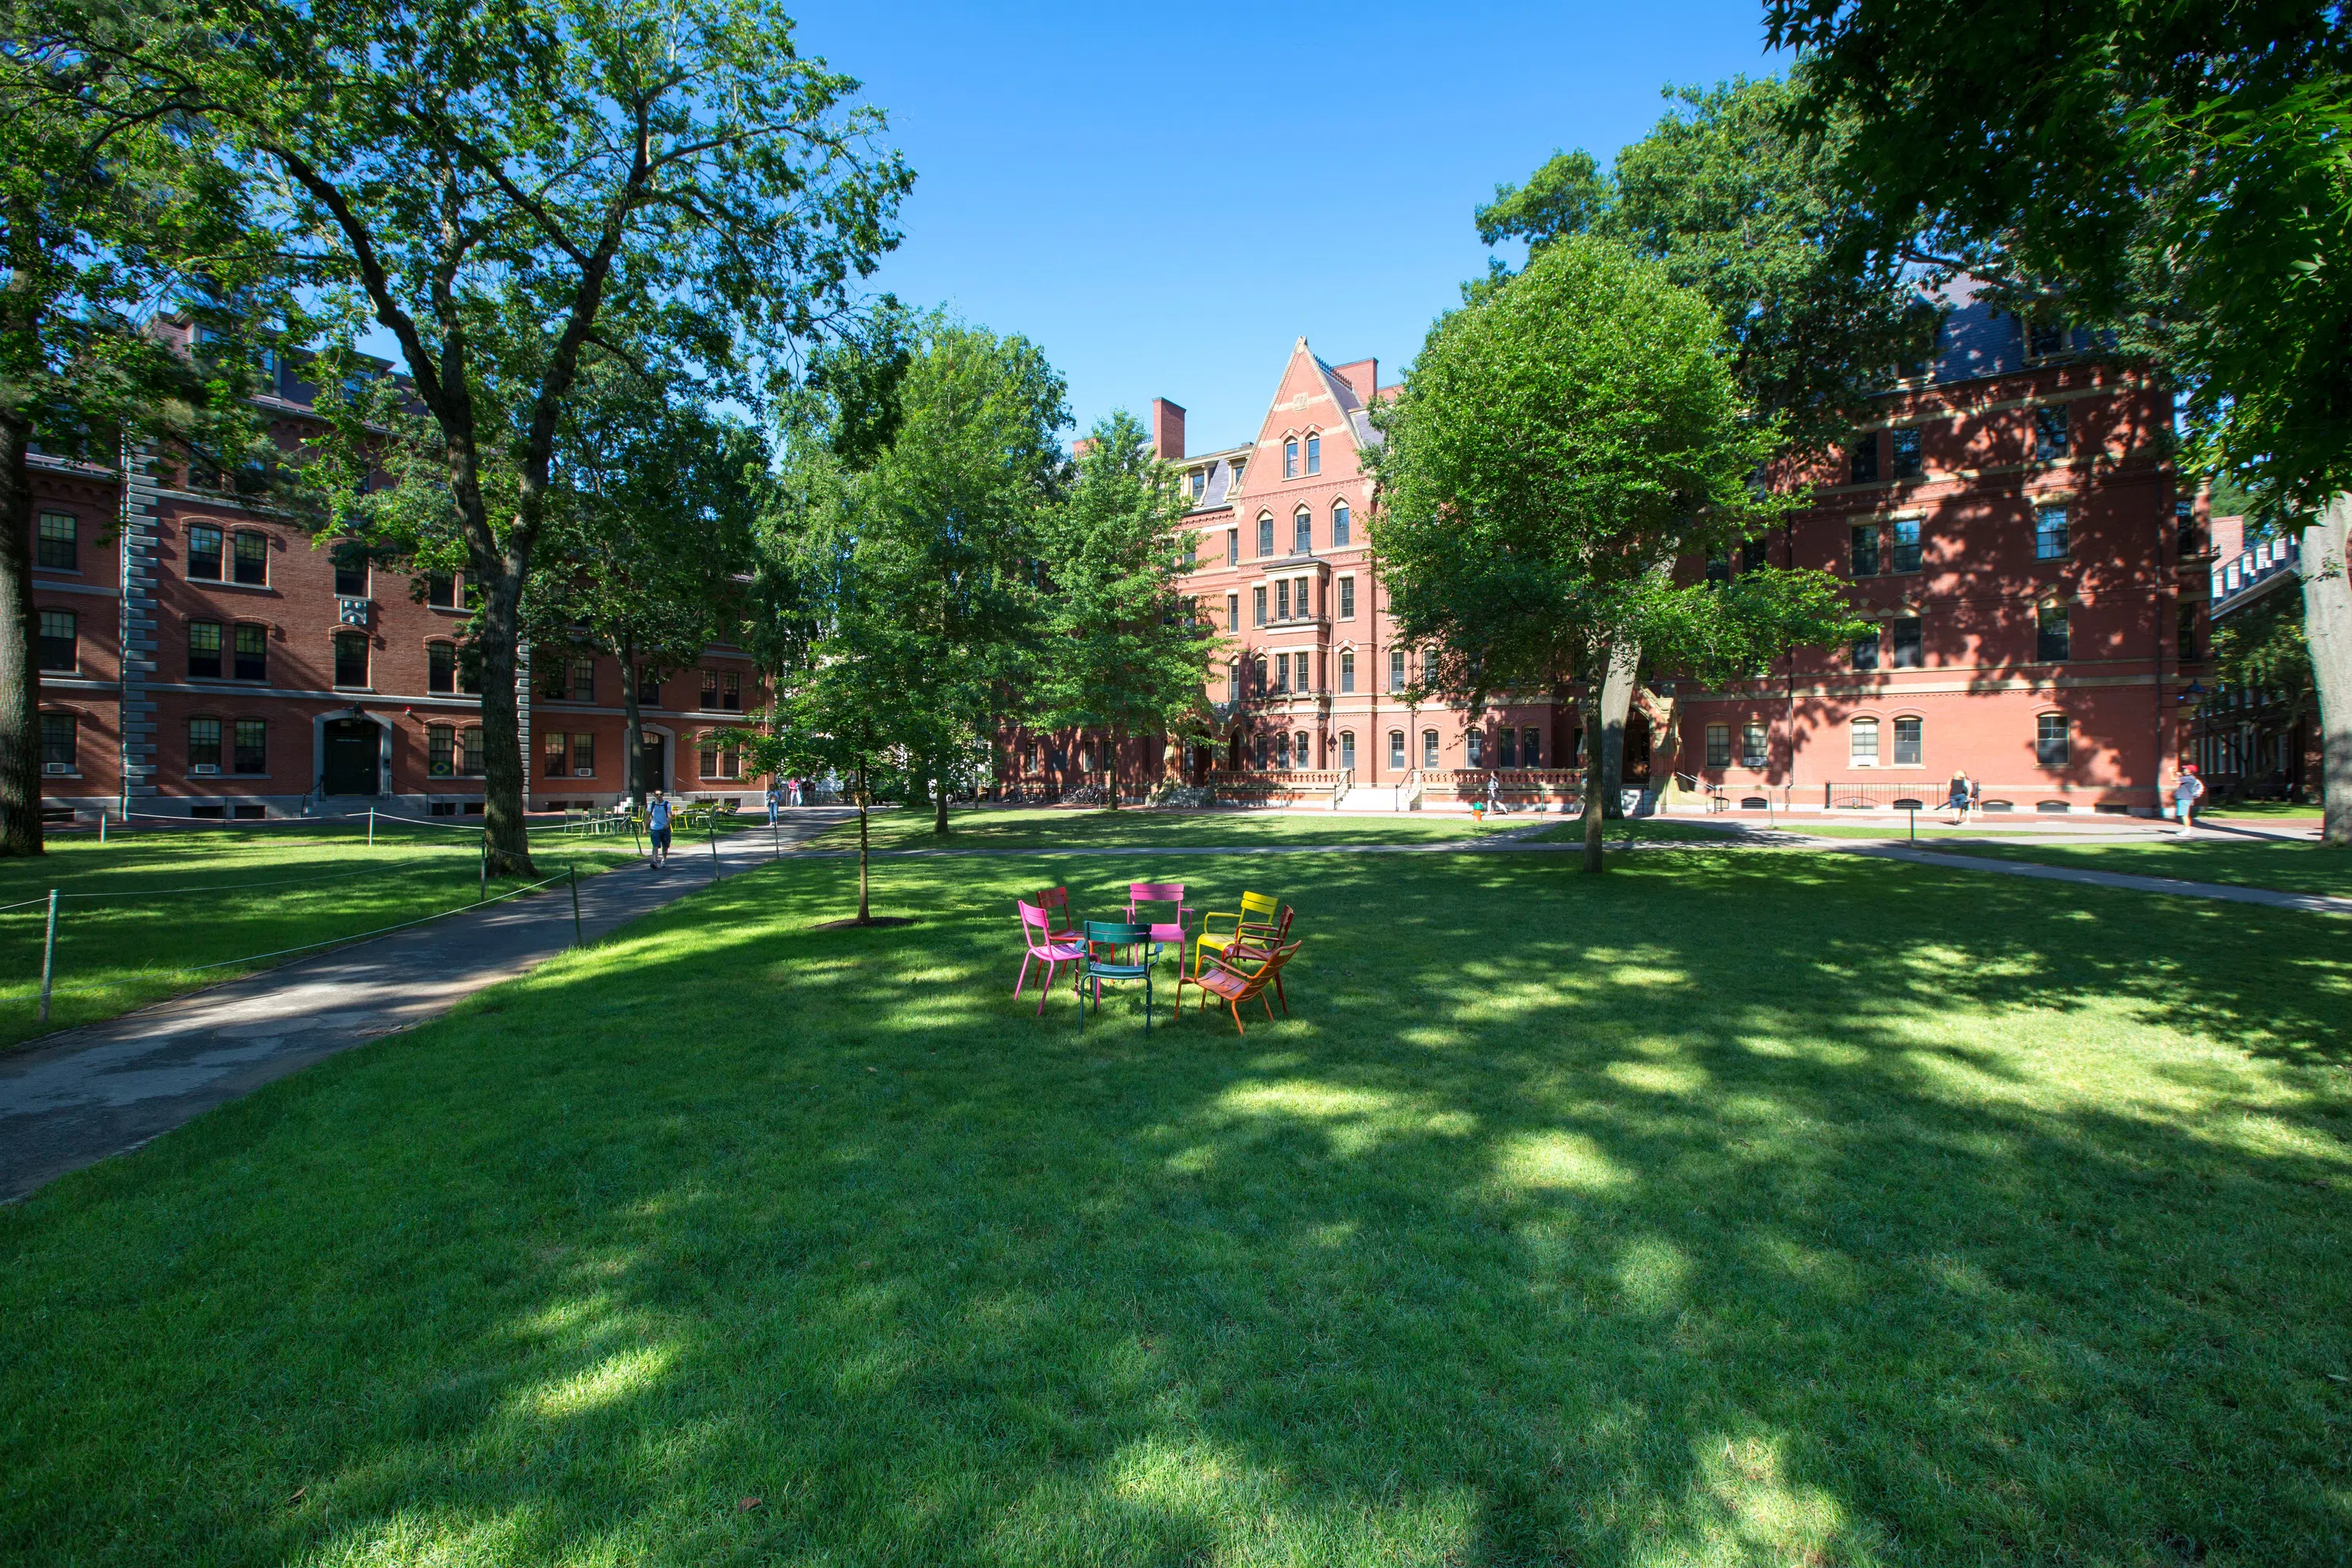 Colorful chairs sit in a circle on a grassy quad, with a red brick building in the distance